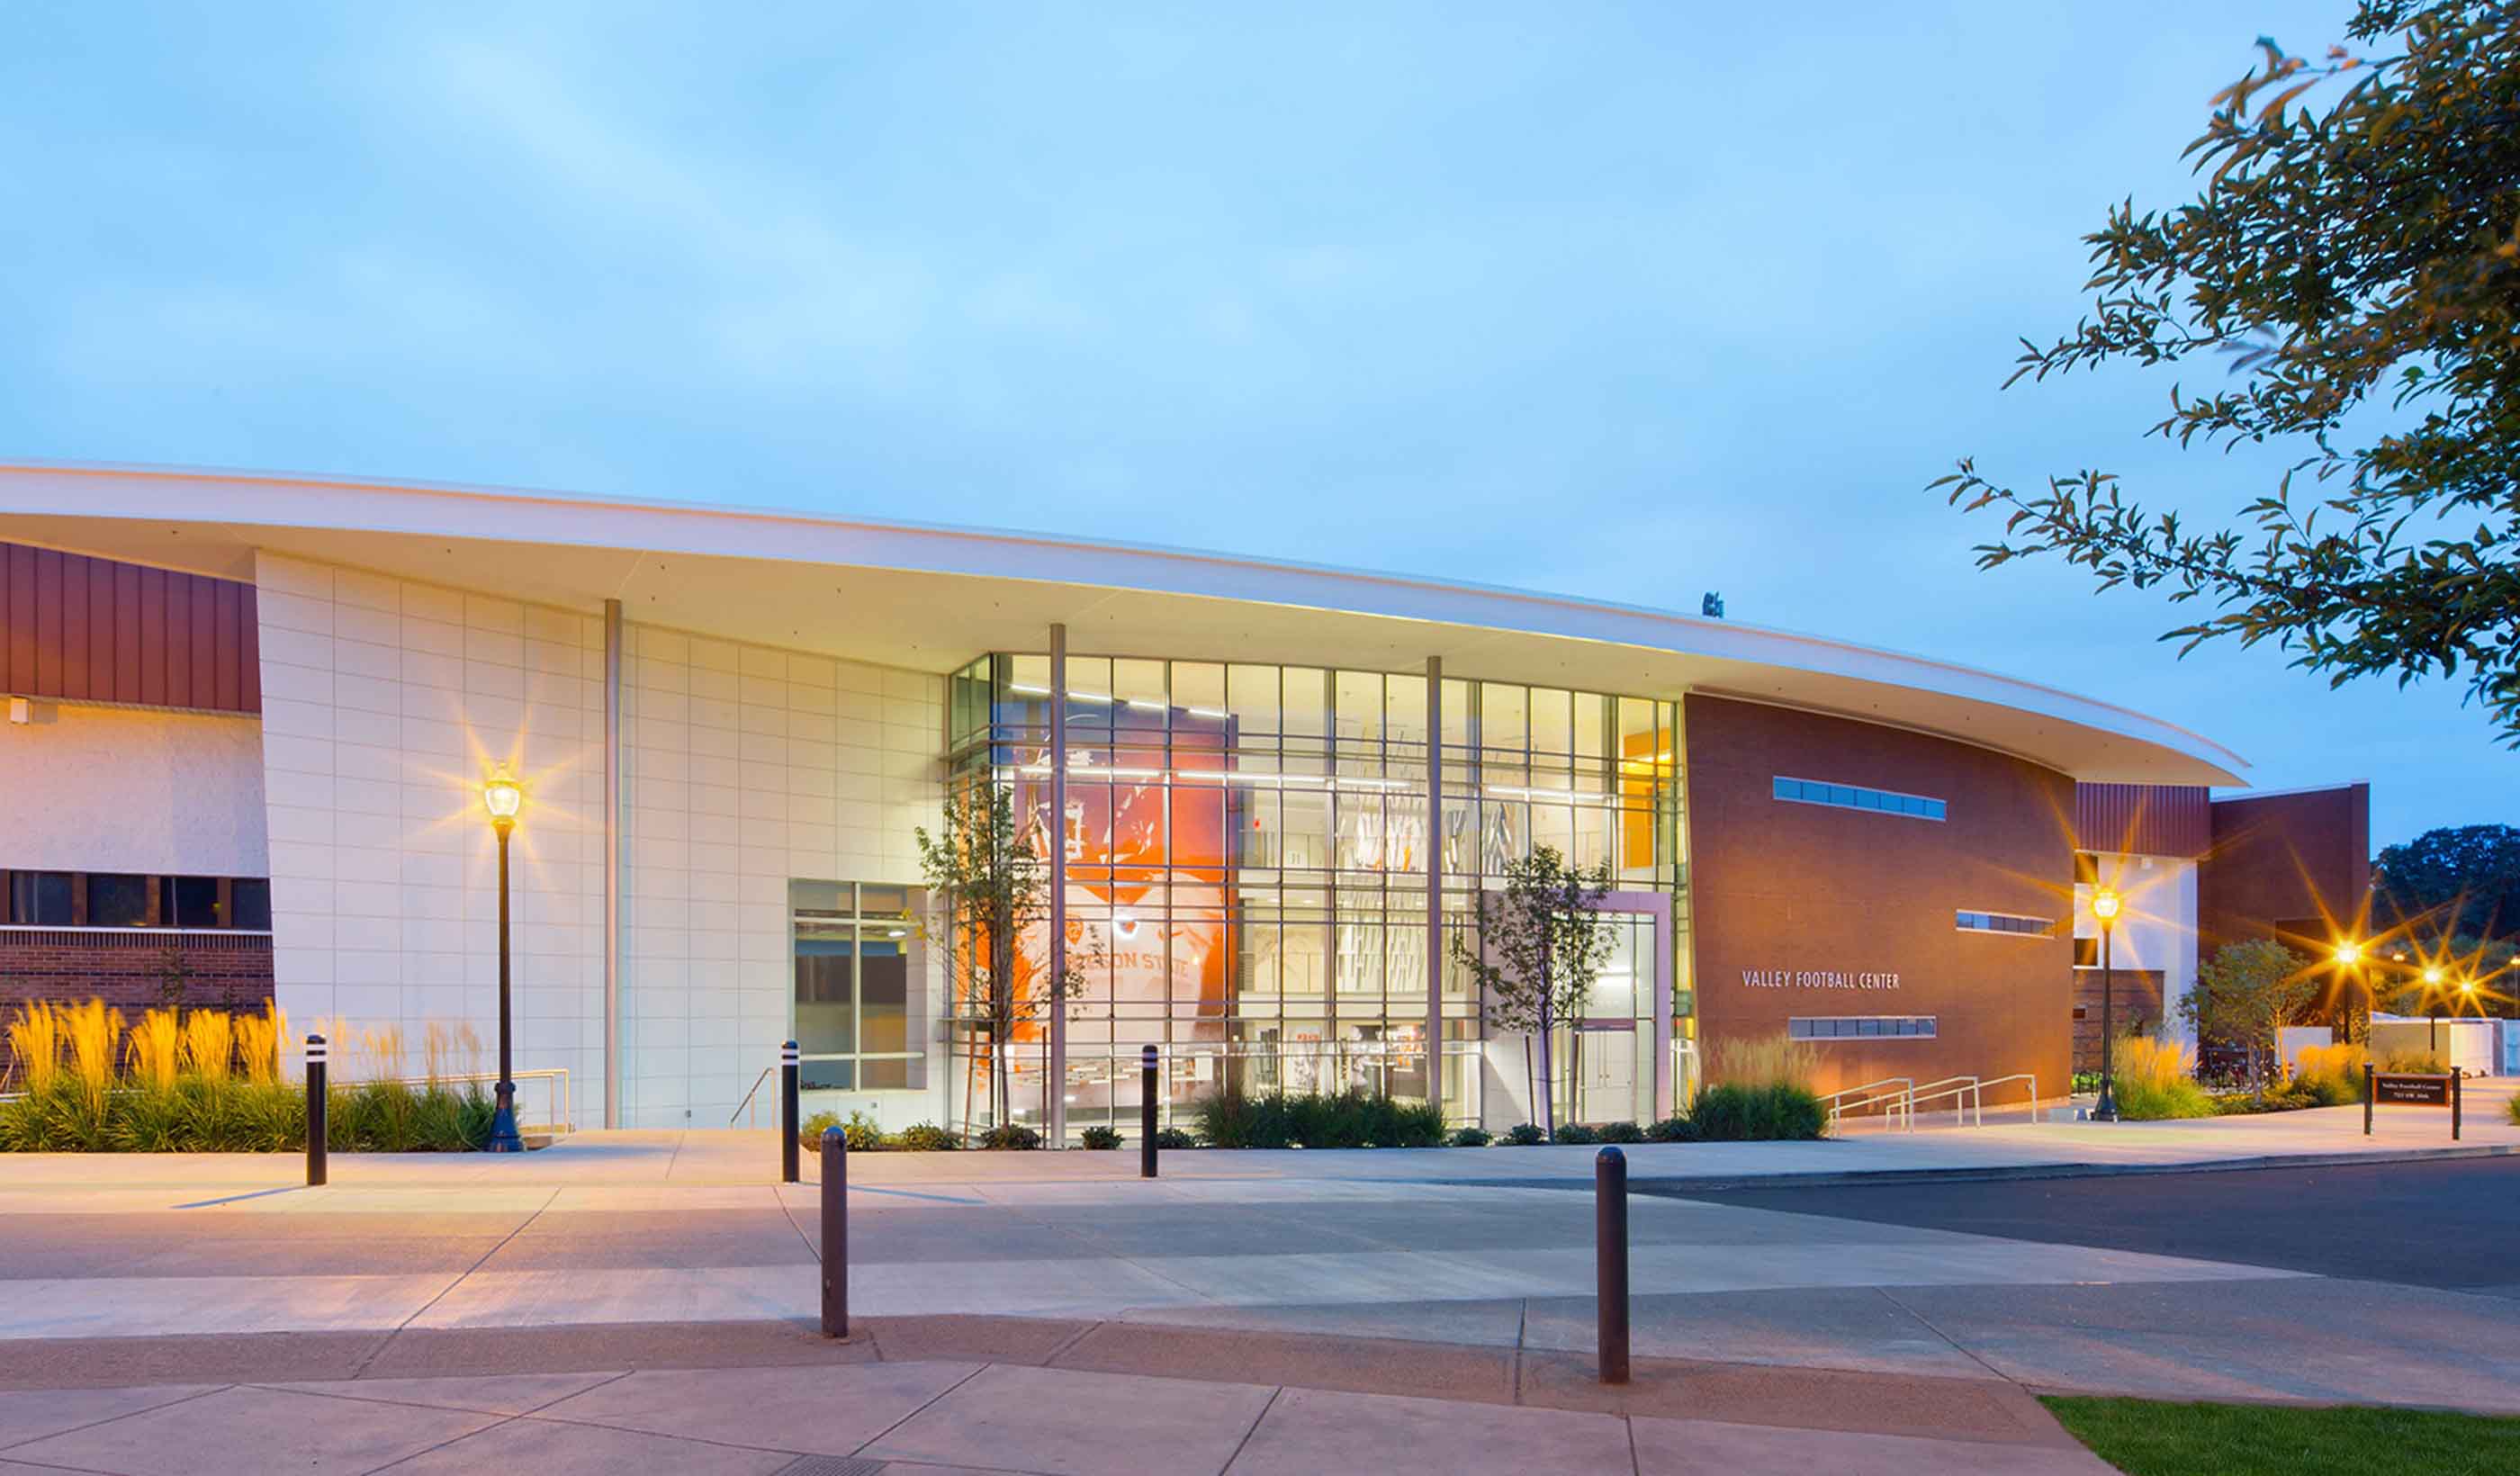 Published in Seattle DJC: OSU football center opts for flexible lighting scheme